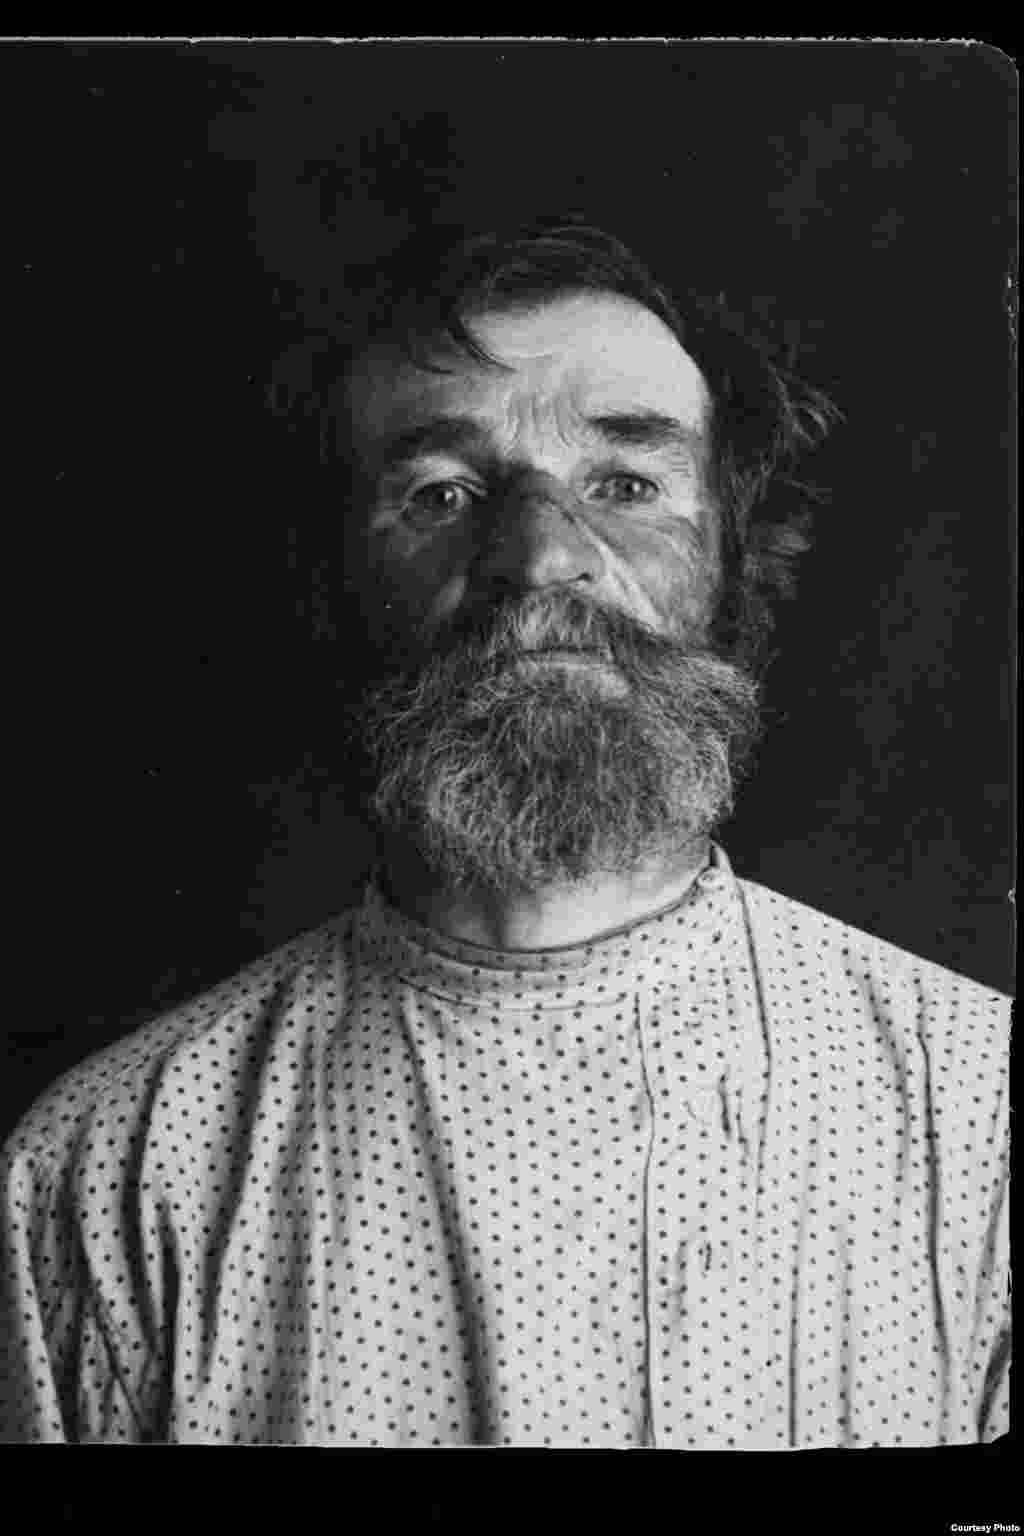 Vasily Semyonovich Kurenkov: Russian; born 1886 in Faleleyevo village, Western Oblast; primary education; no party affiliation; worker on a state farm; lived in Polozovo village, Moscow Oblast. Arrested on August 10, 1937. Sentenced to death on August 19, 1937. Executed on August 21, 1937. Rehabilitated in 1989.